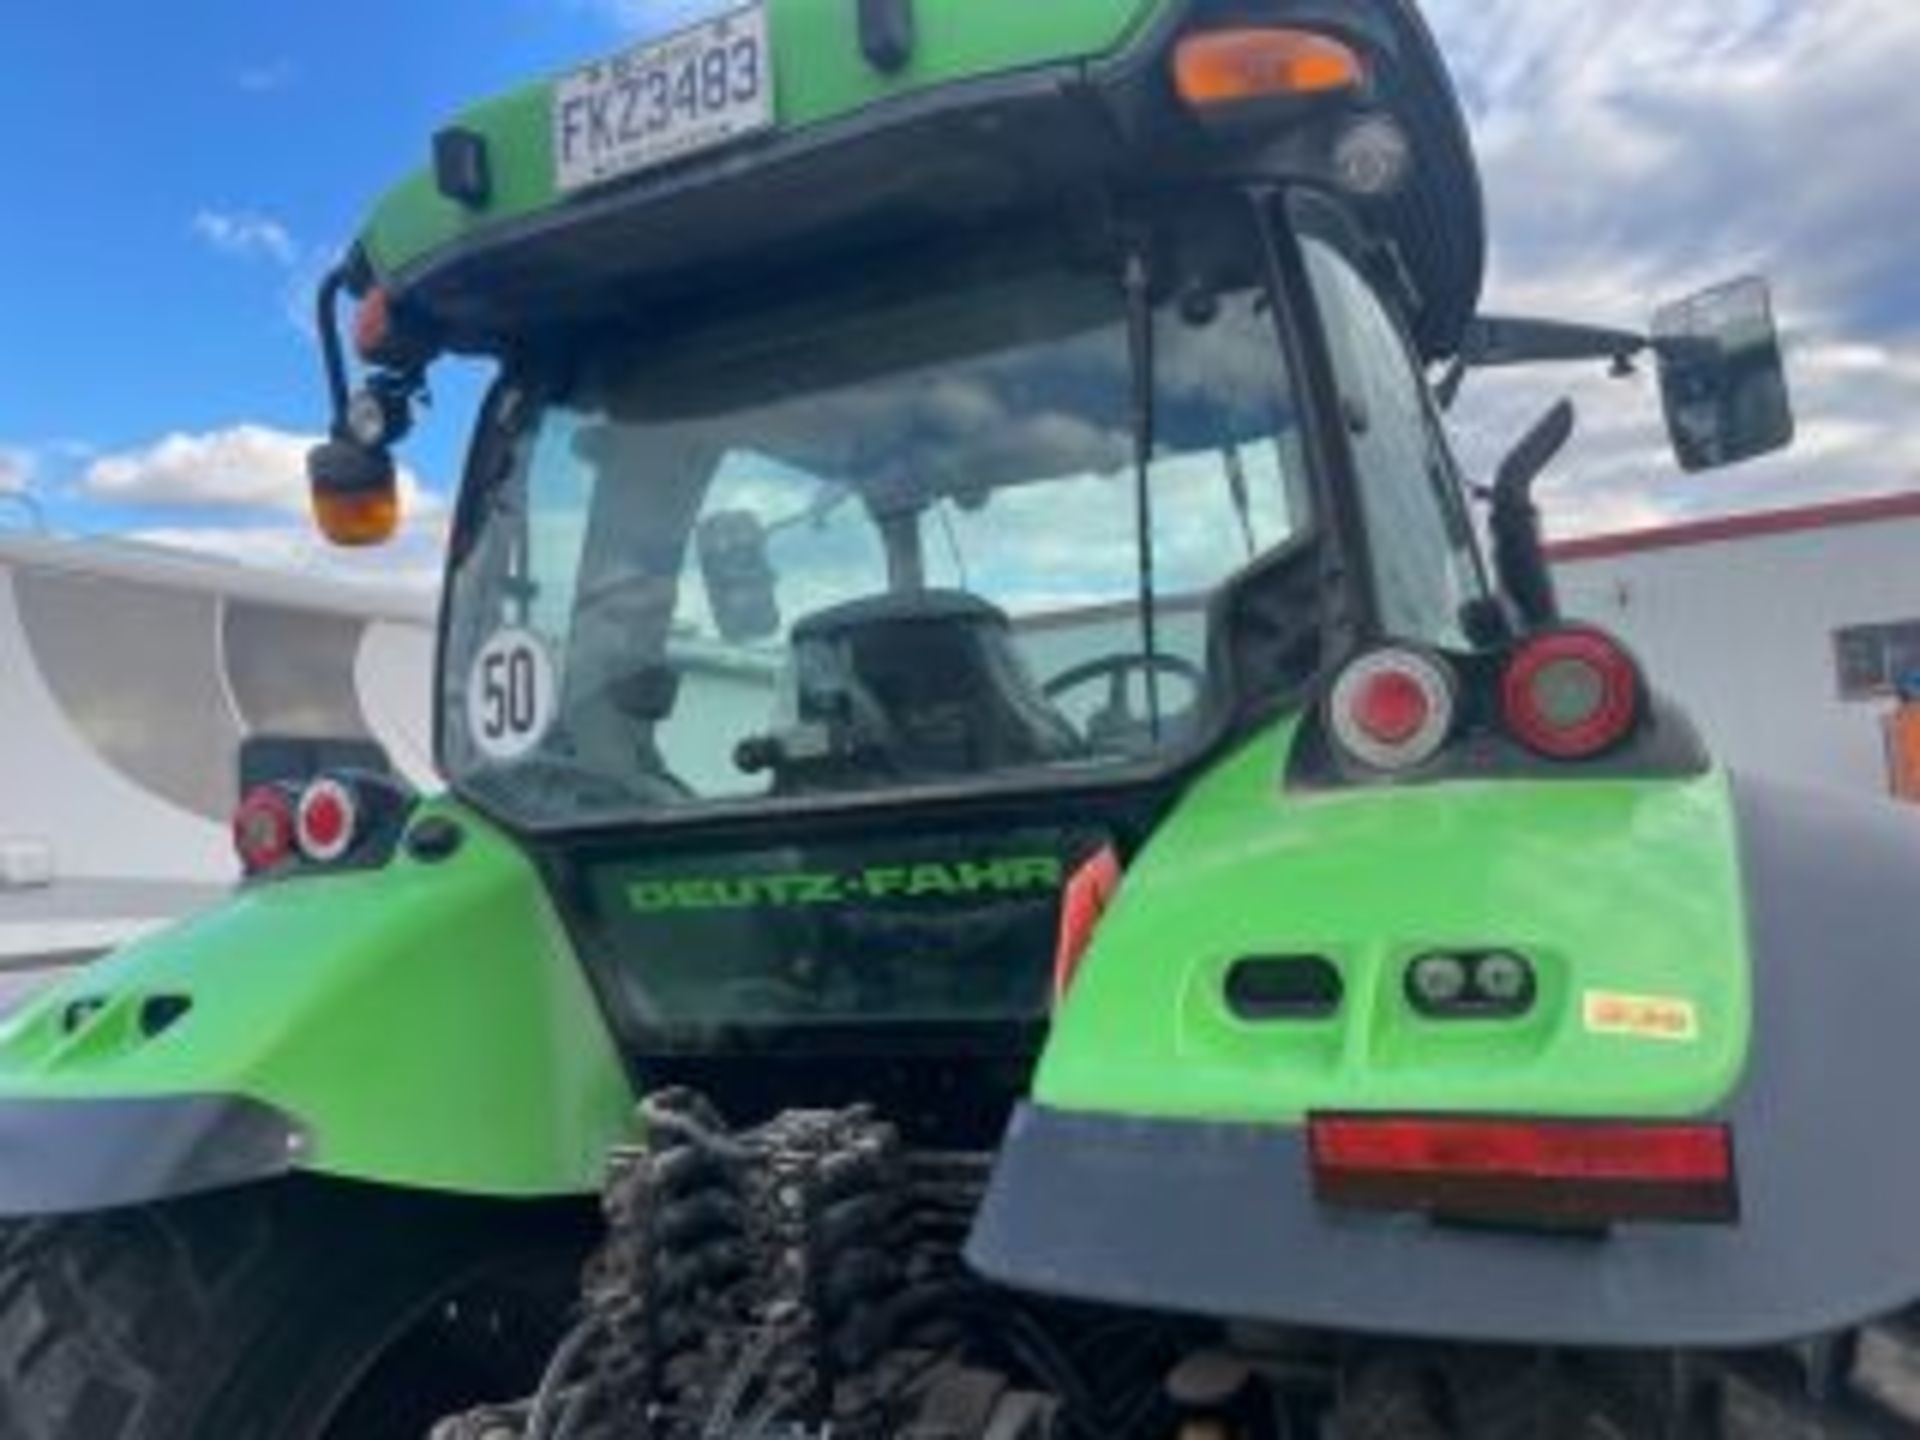 2018 DEUTZ-FAHR agricultural tractor # T51-10003 With PRONOVOST snow removal attachment 1109.8 Hours - Image 3 of 27